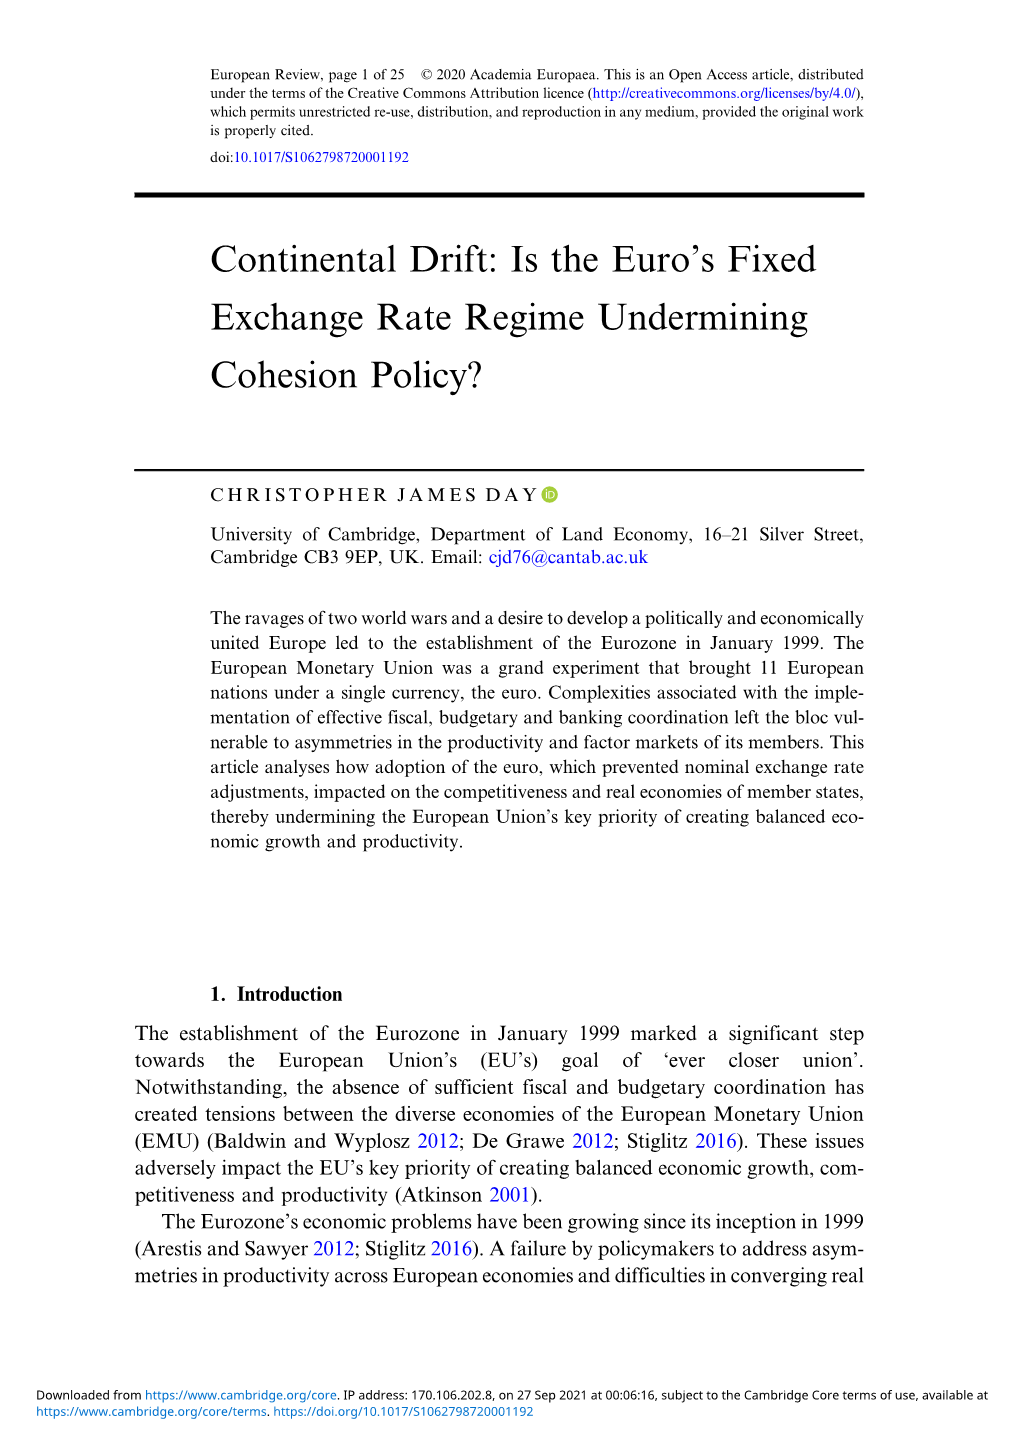 Is the Euro's Fixed Exchange Rate Regime Undermining Cohesion Policy?